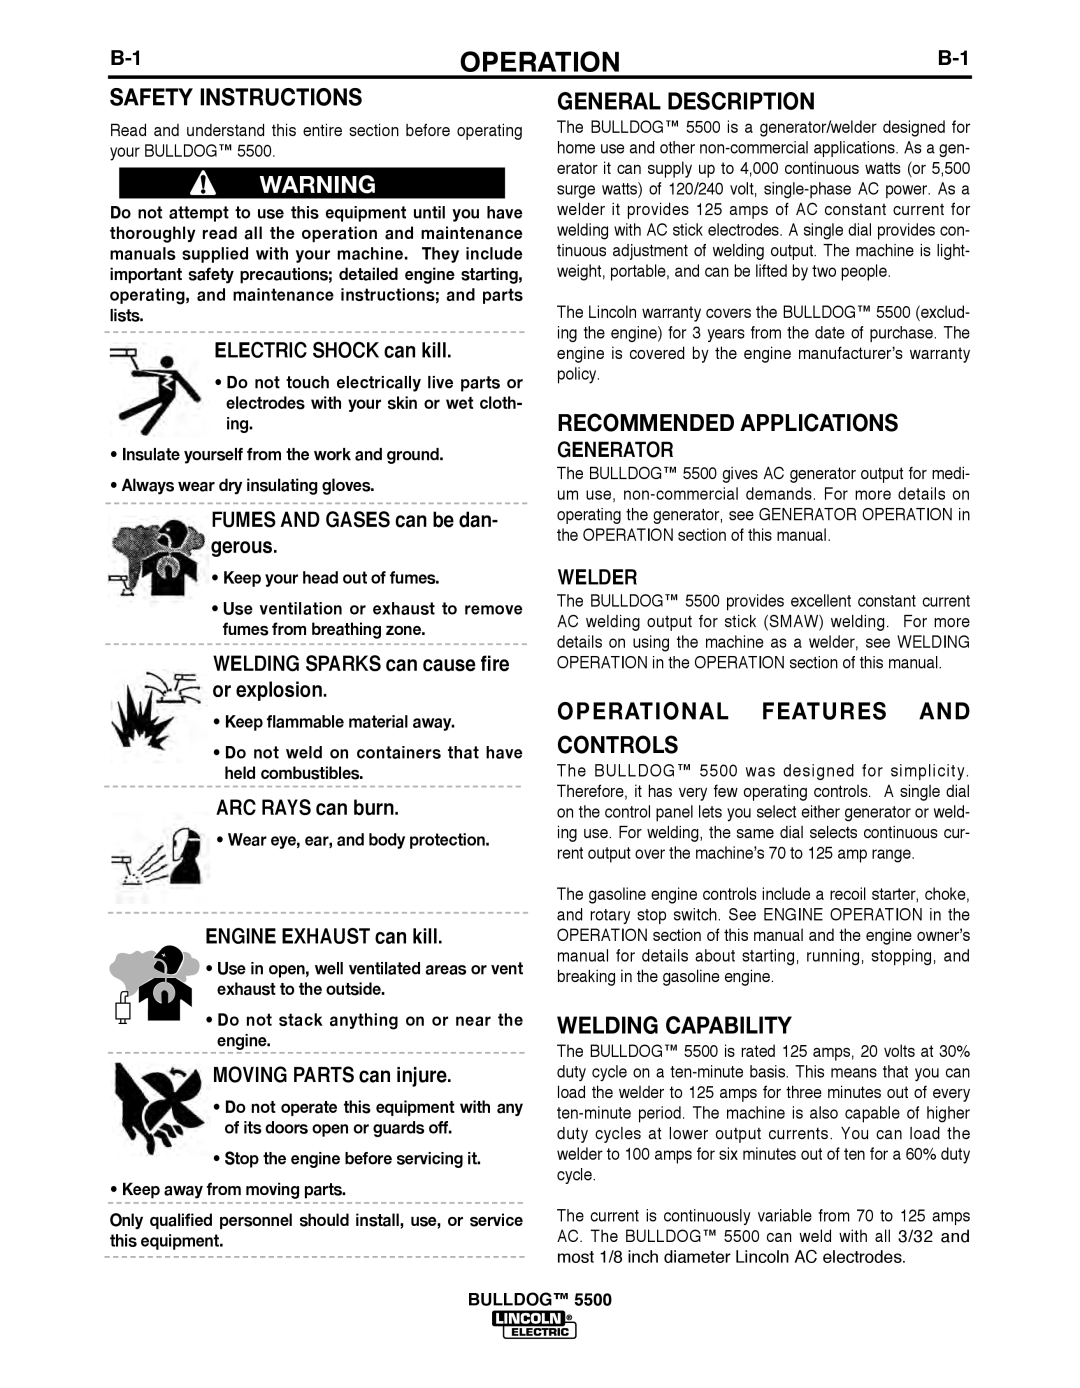 Lincoln Electric IM10074 Operation, Safety Instructions, General Description, Recommended Applications, Welding Capability 